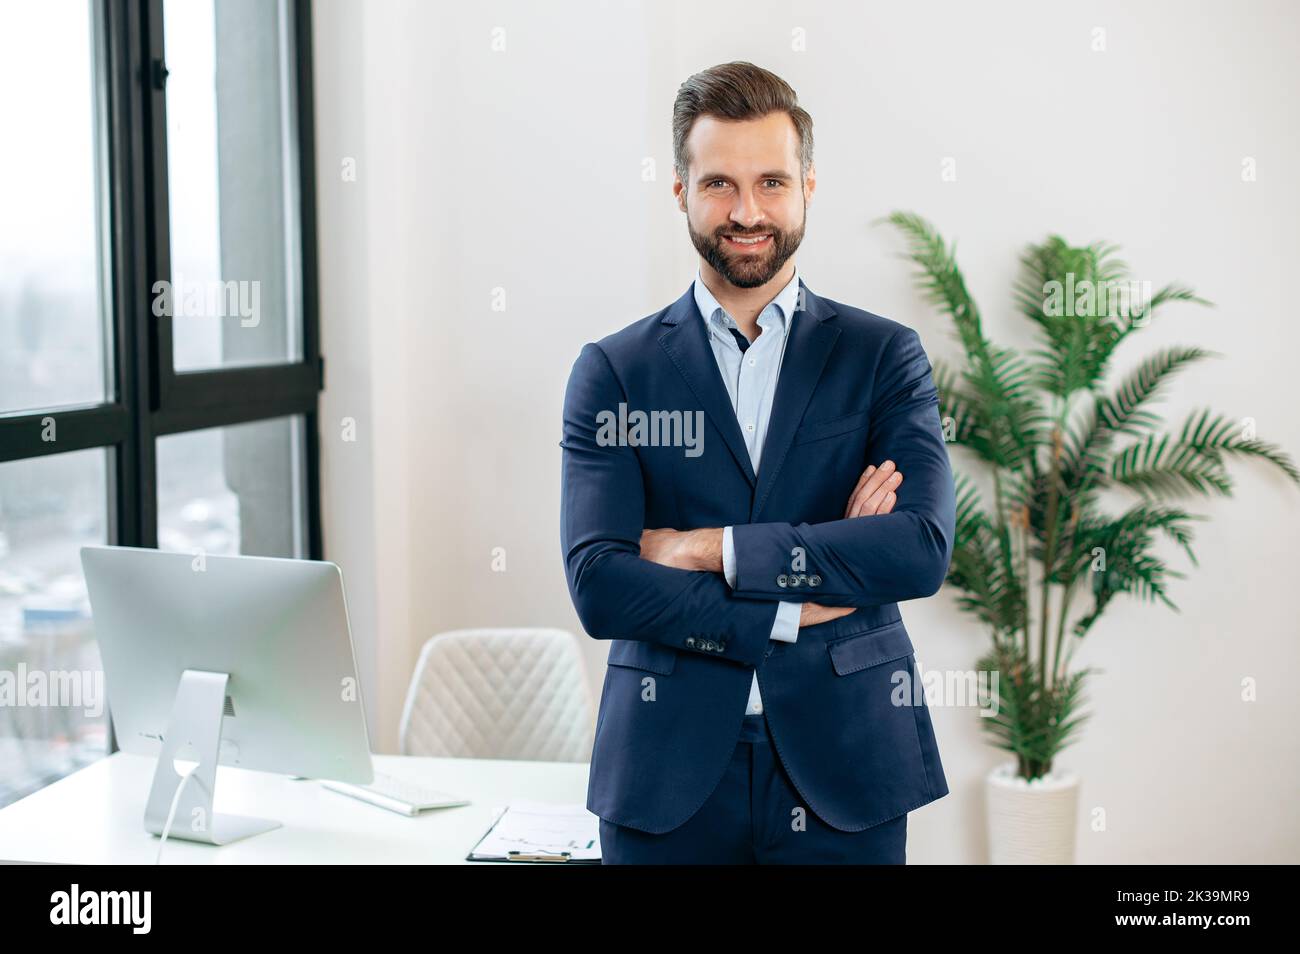 Portrait of a handsome confident elegant successful caucasian bearded man, in a suit, top manager, company ceo, financial director, stand in the office, arms crossed, looking at the camera, smiling Stock Photo